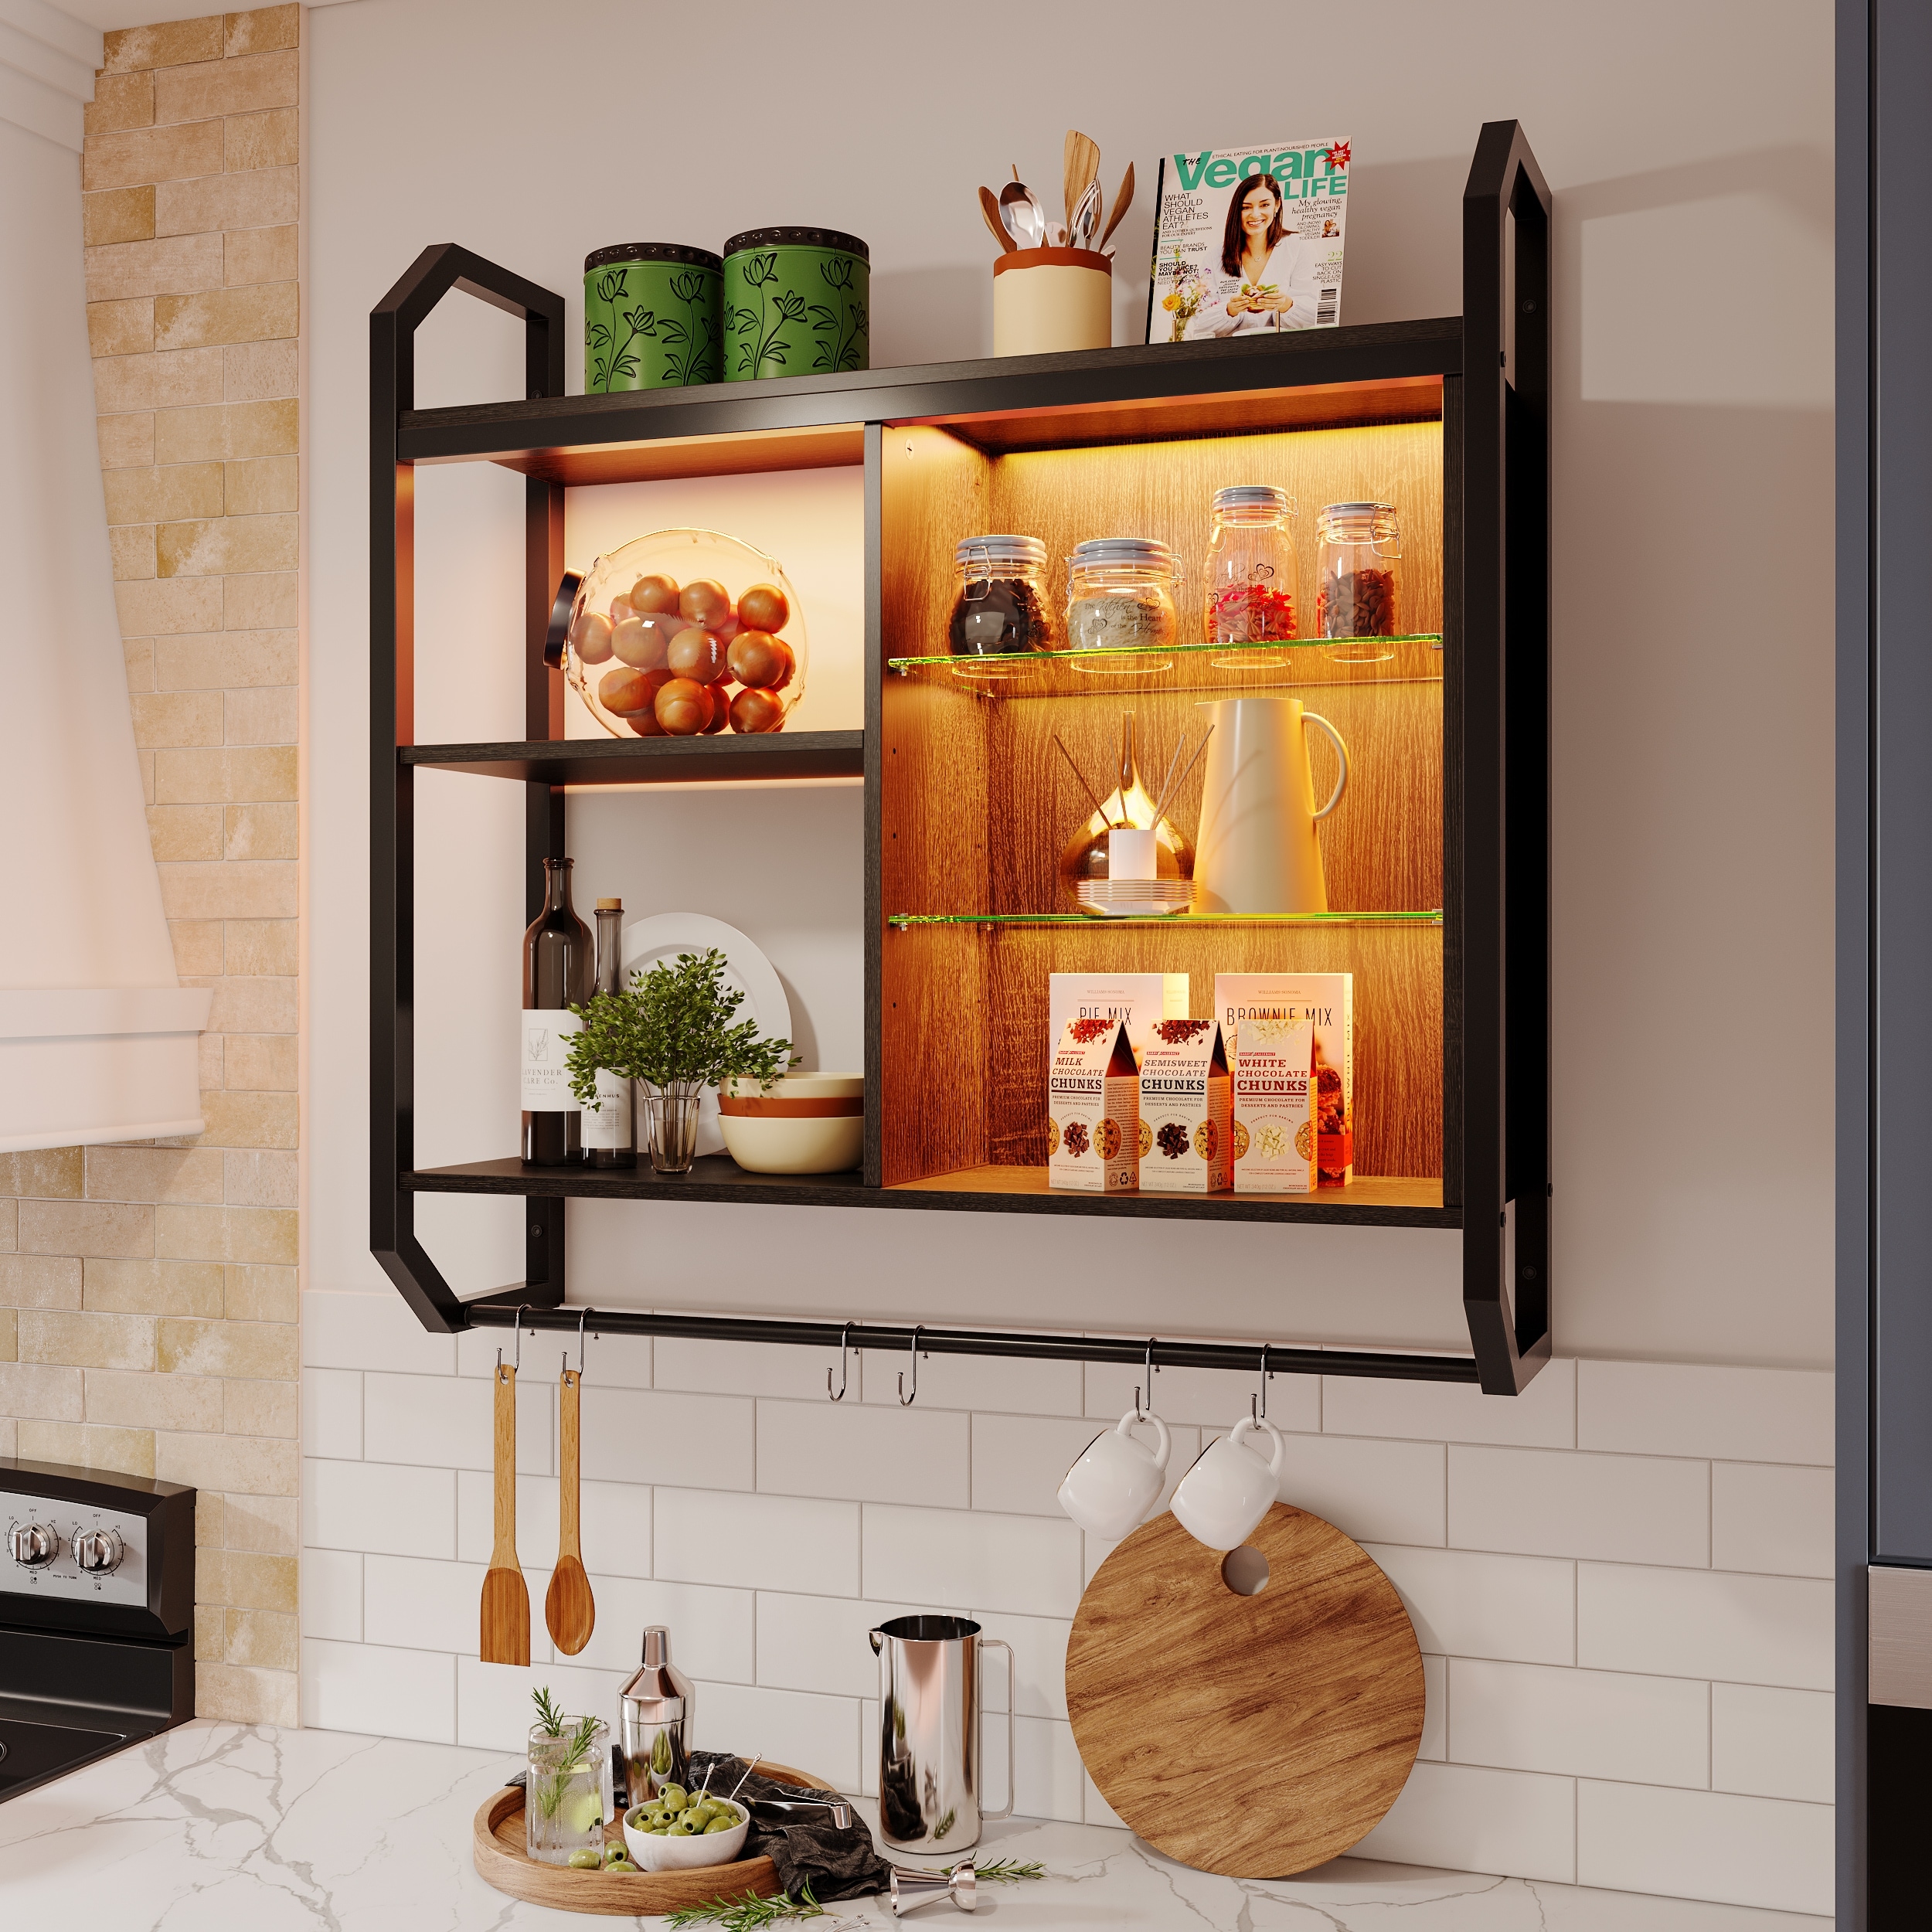 https://ak1.ostkcdn.com/images/products/is/images/direct/05204ffa595ab6b3b3d5aefe0035f2d11d562505/Floating-Shelves-with-LED-%26-Towel-Bar-Industrial-Wall-Shelves.jpg